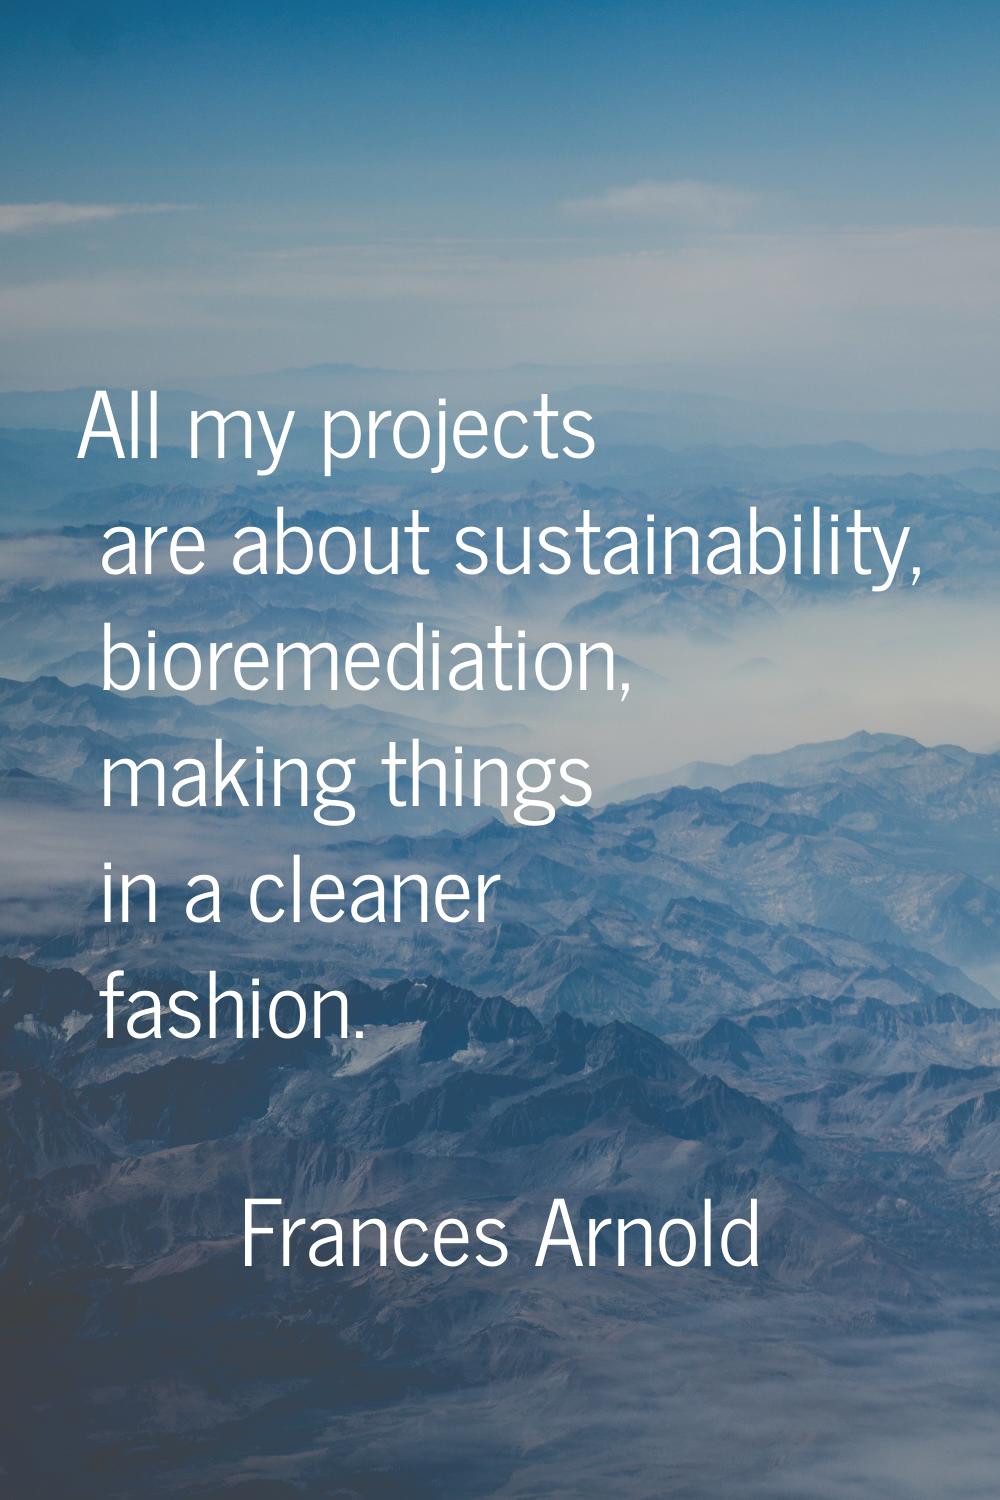 All my projects are about sustainability, bioremediation, making things in a cleaner fashion.